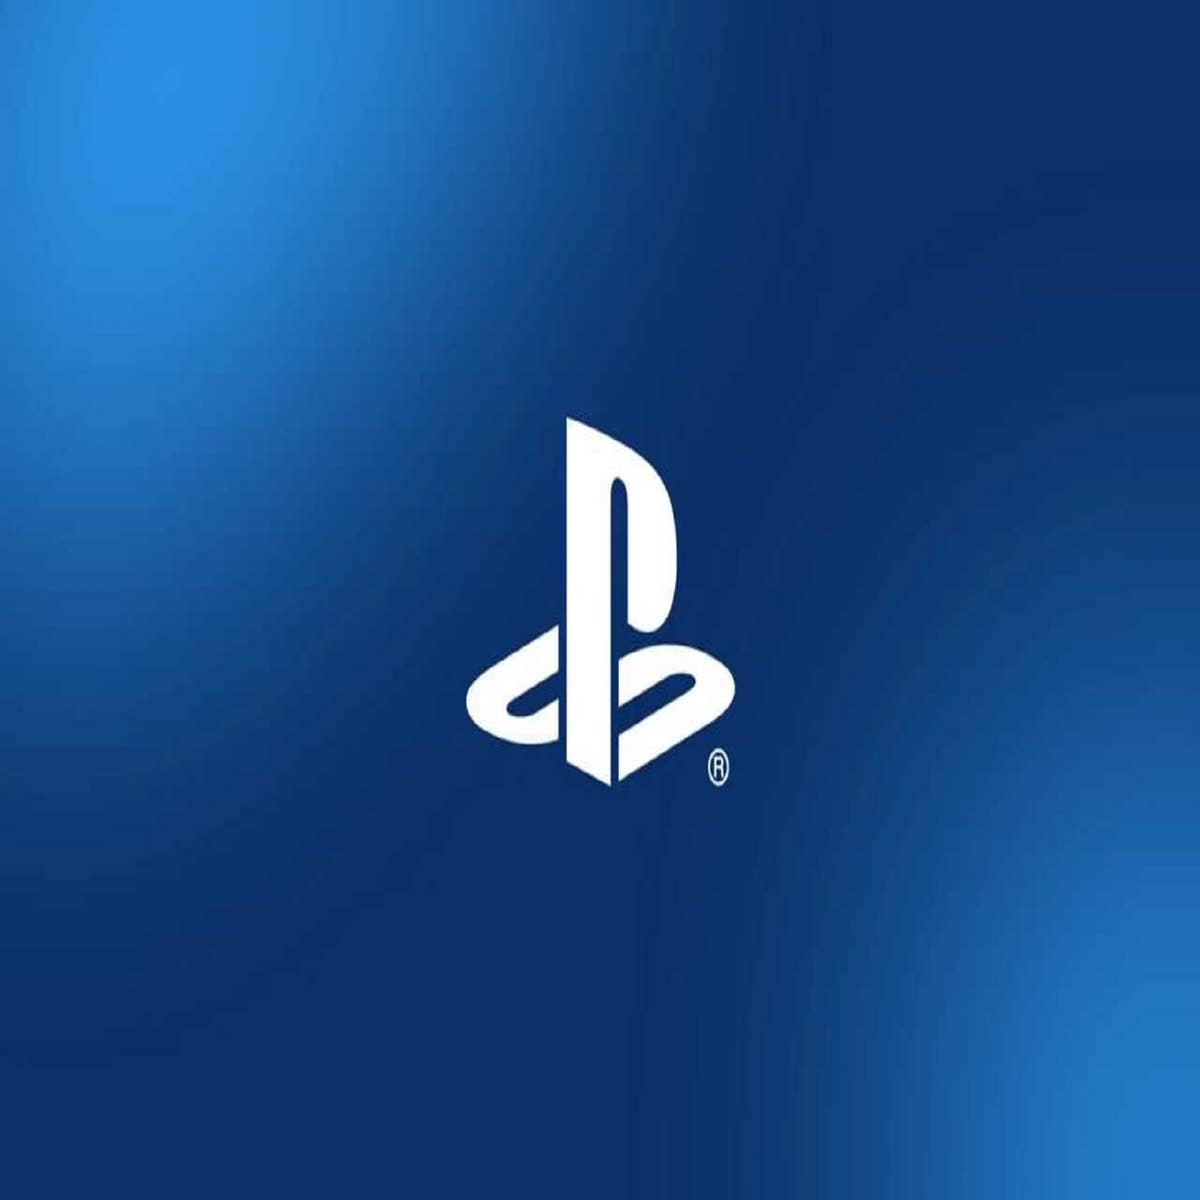 FOSS Patents: Truth hurts: Sony reportedly postpones Showcase event because  presenting major PlayStation exclusives would undermine its argument  against Microsoft-ActivisionBlizzard